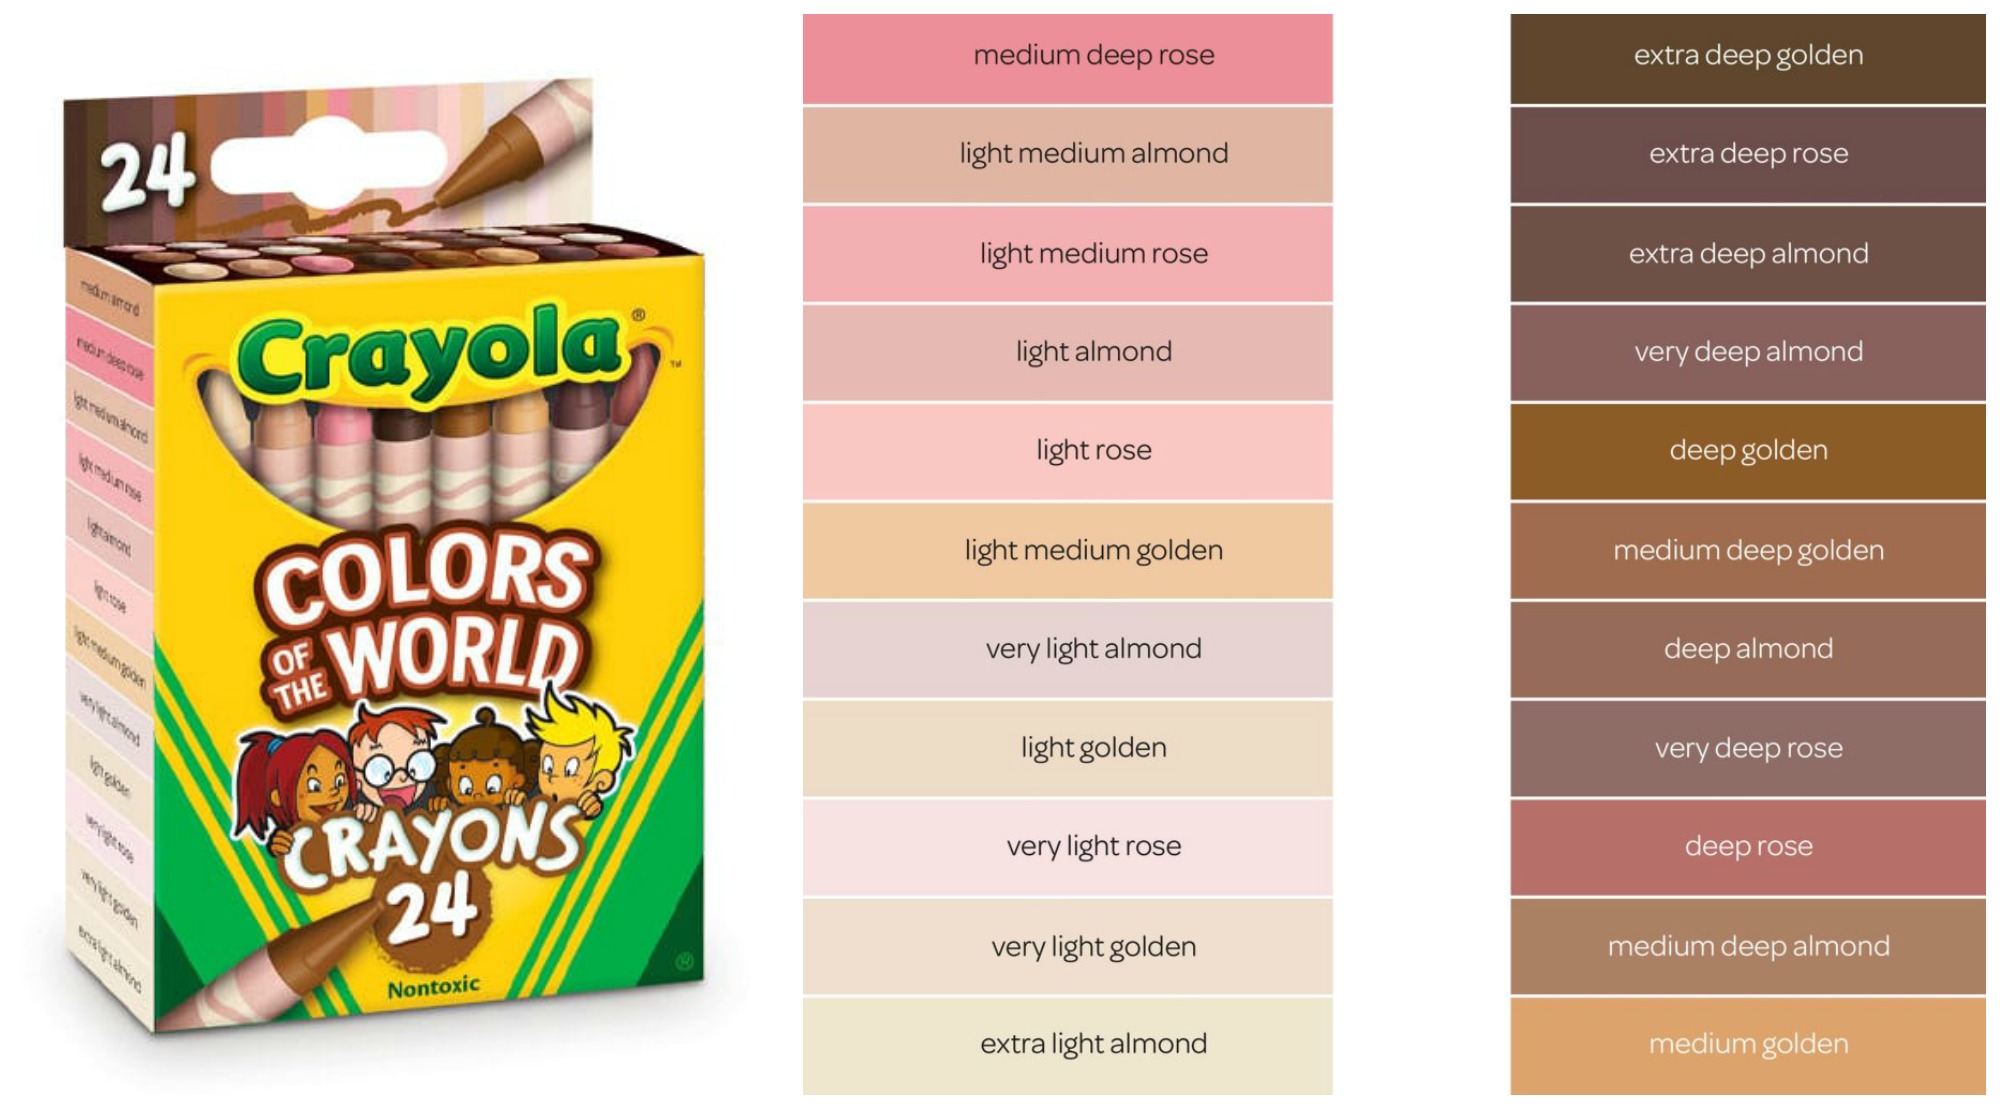 Crayola’s Releasing ‘Colors of the World’ Crayon Box Including 24 New Skin Tone Shades